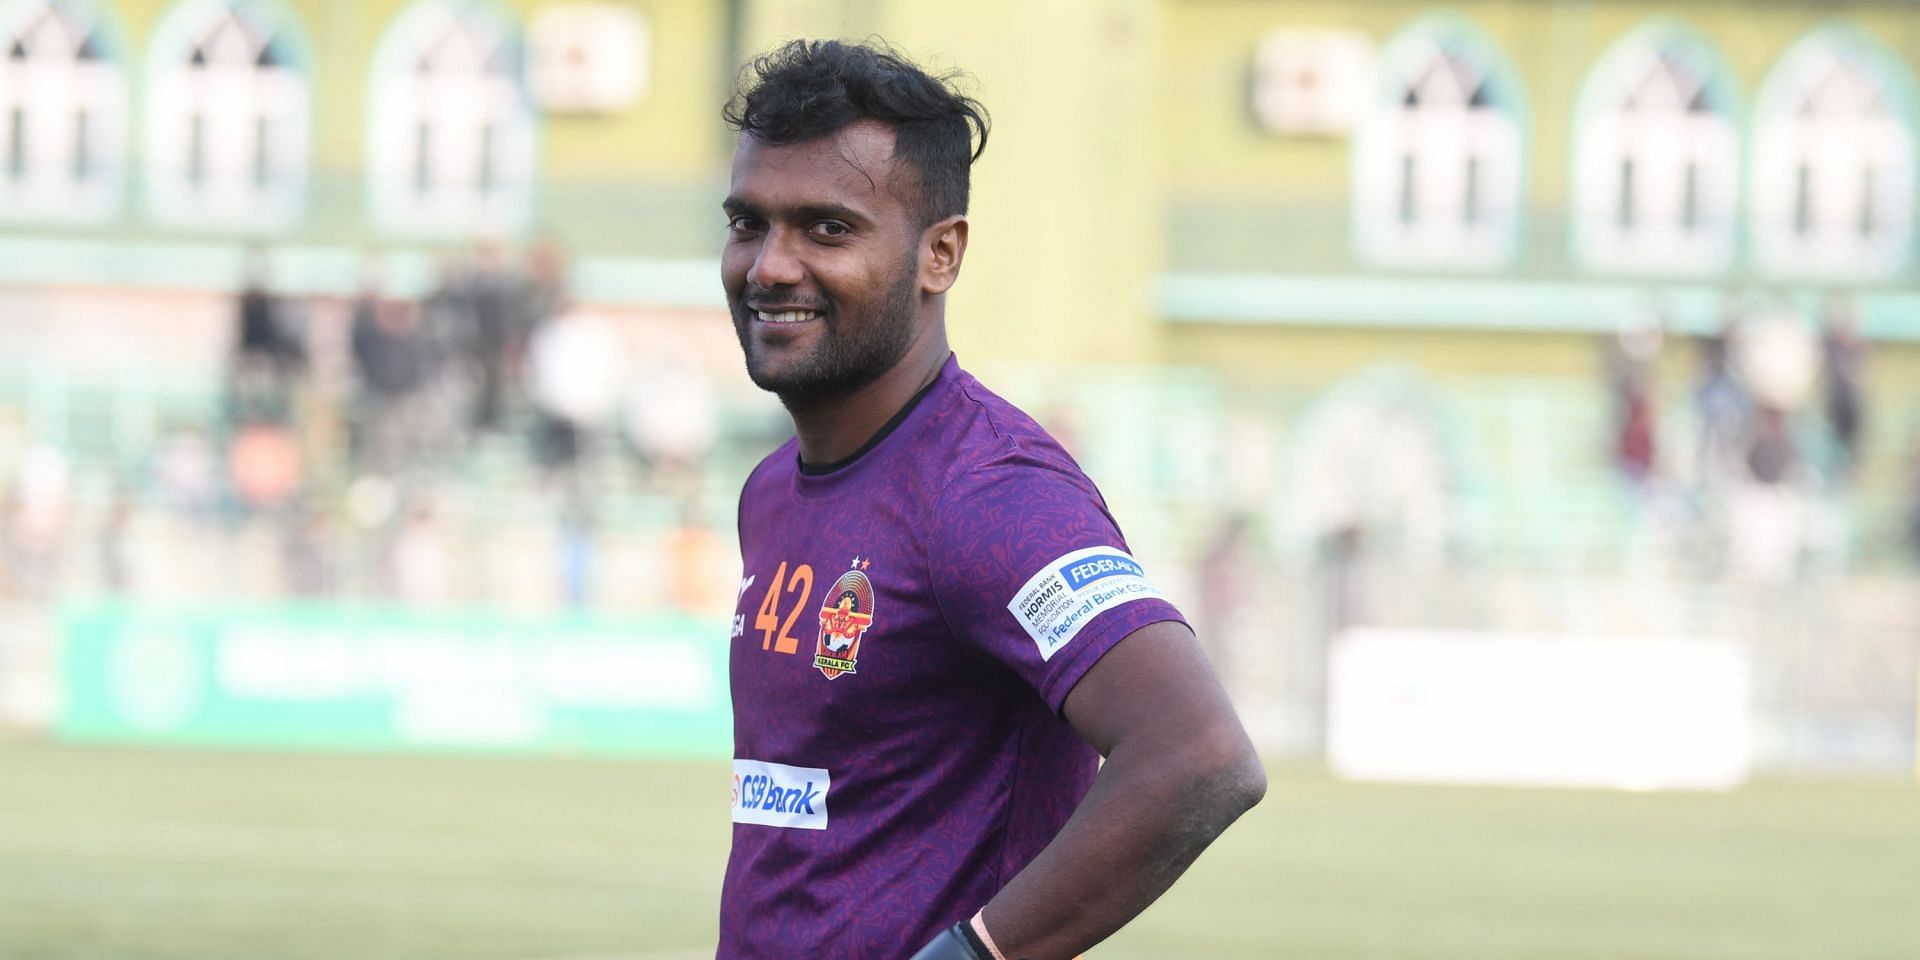 Punjab FC has officially announced that it is mutually parting ways with goalkeeper Shibinraj Kunniyil